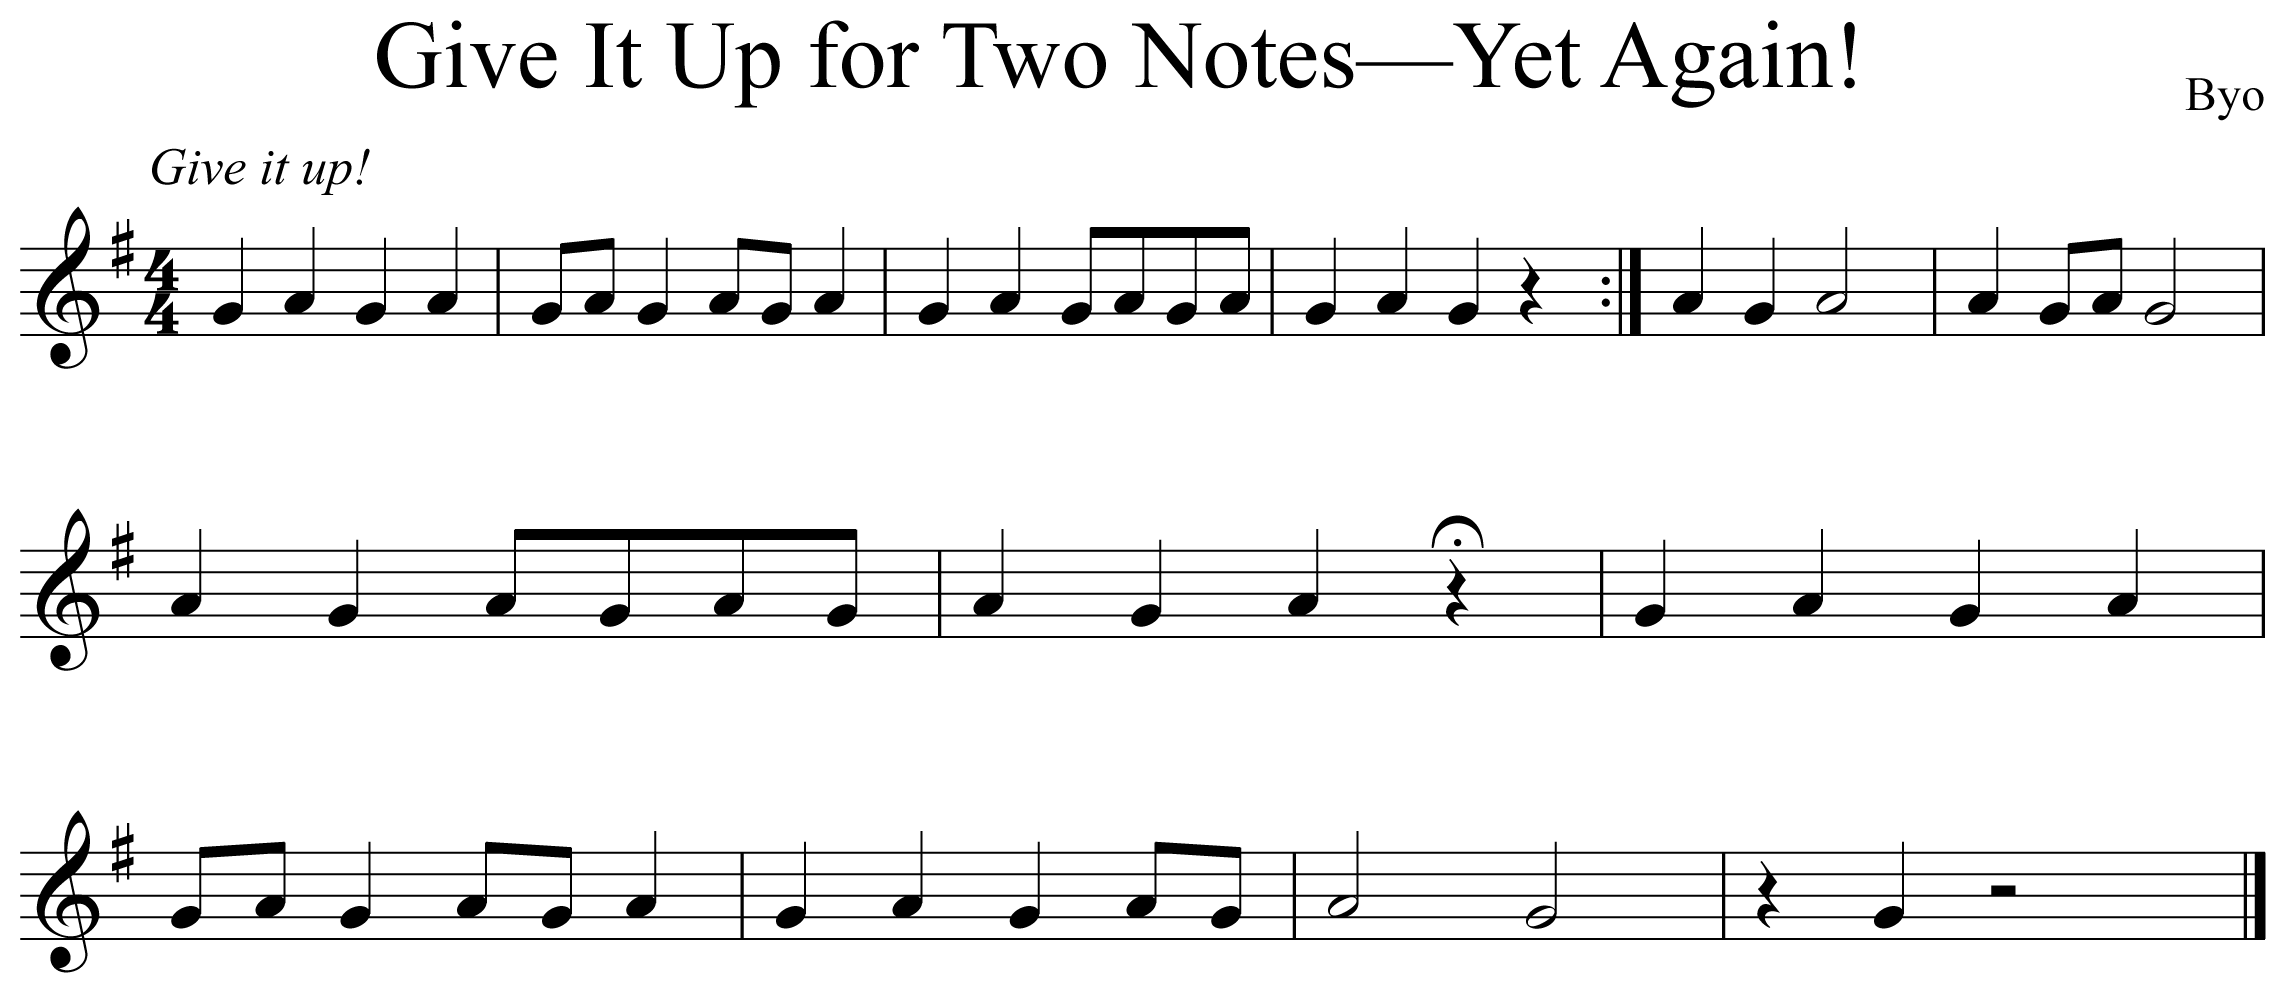 Give it up for Two Notes Yet Again Notation Saxophone